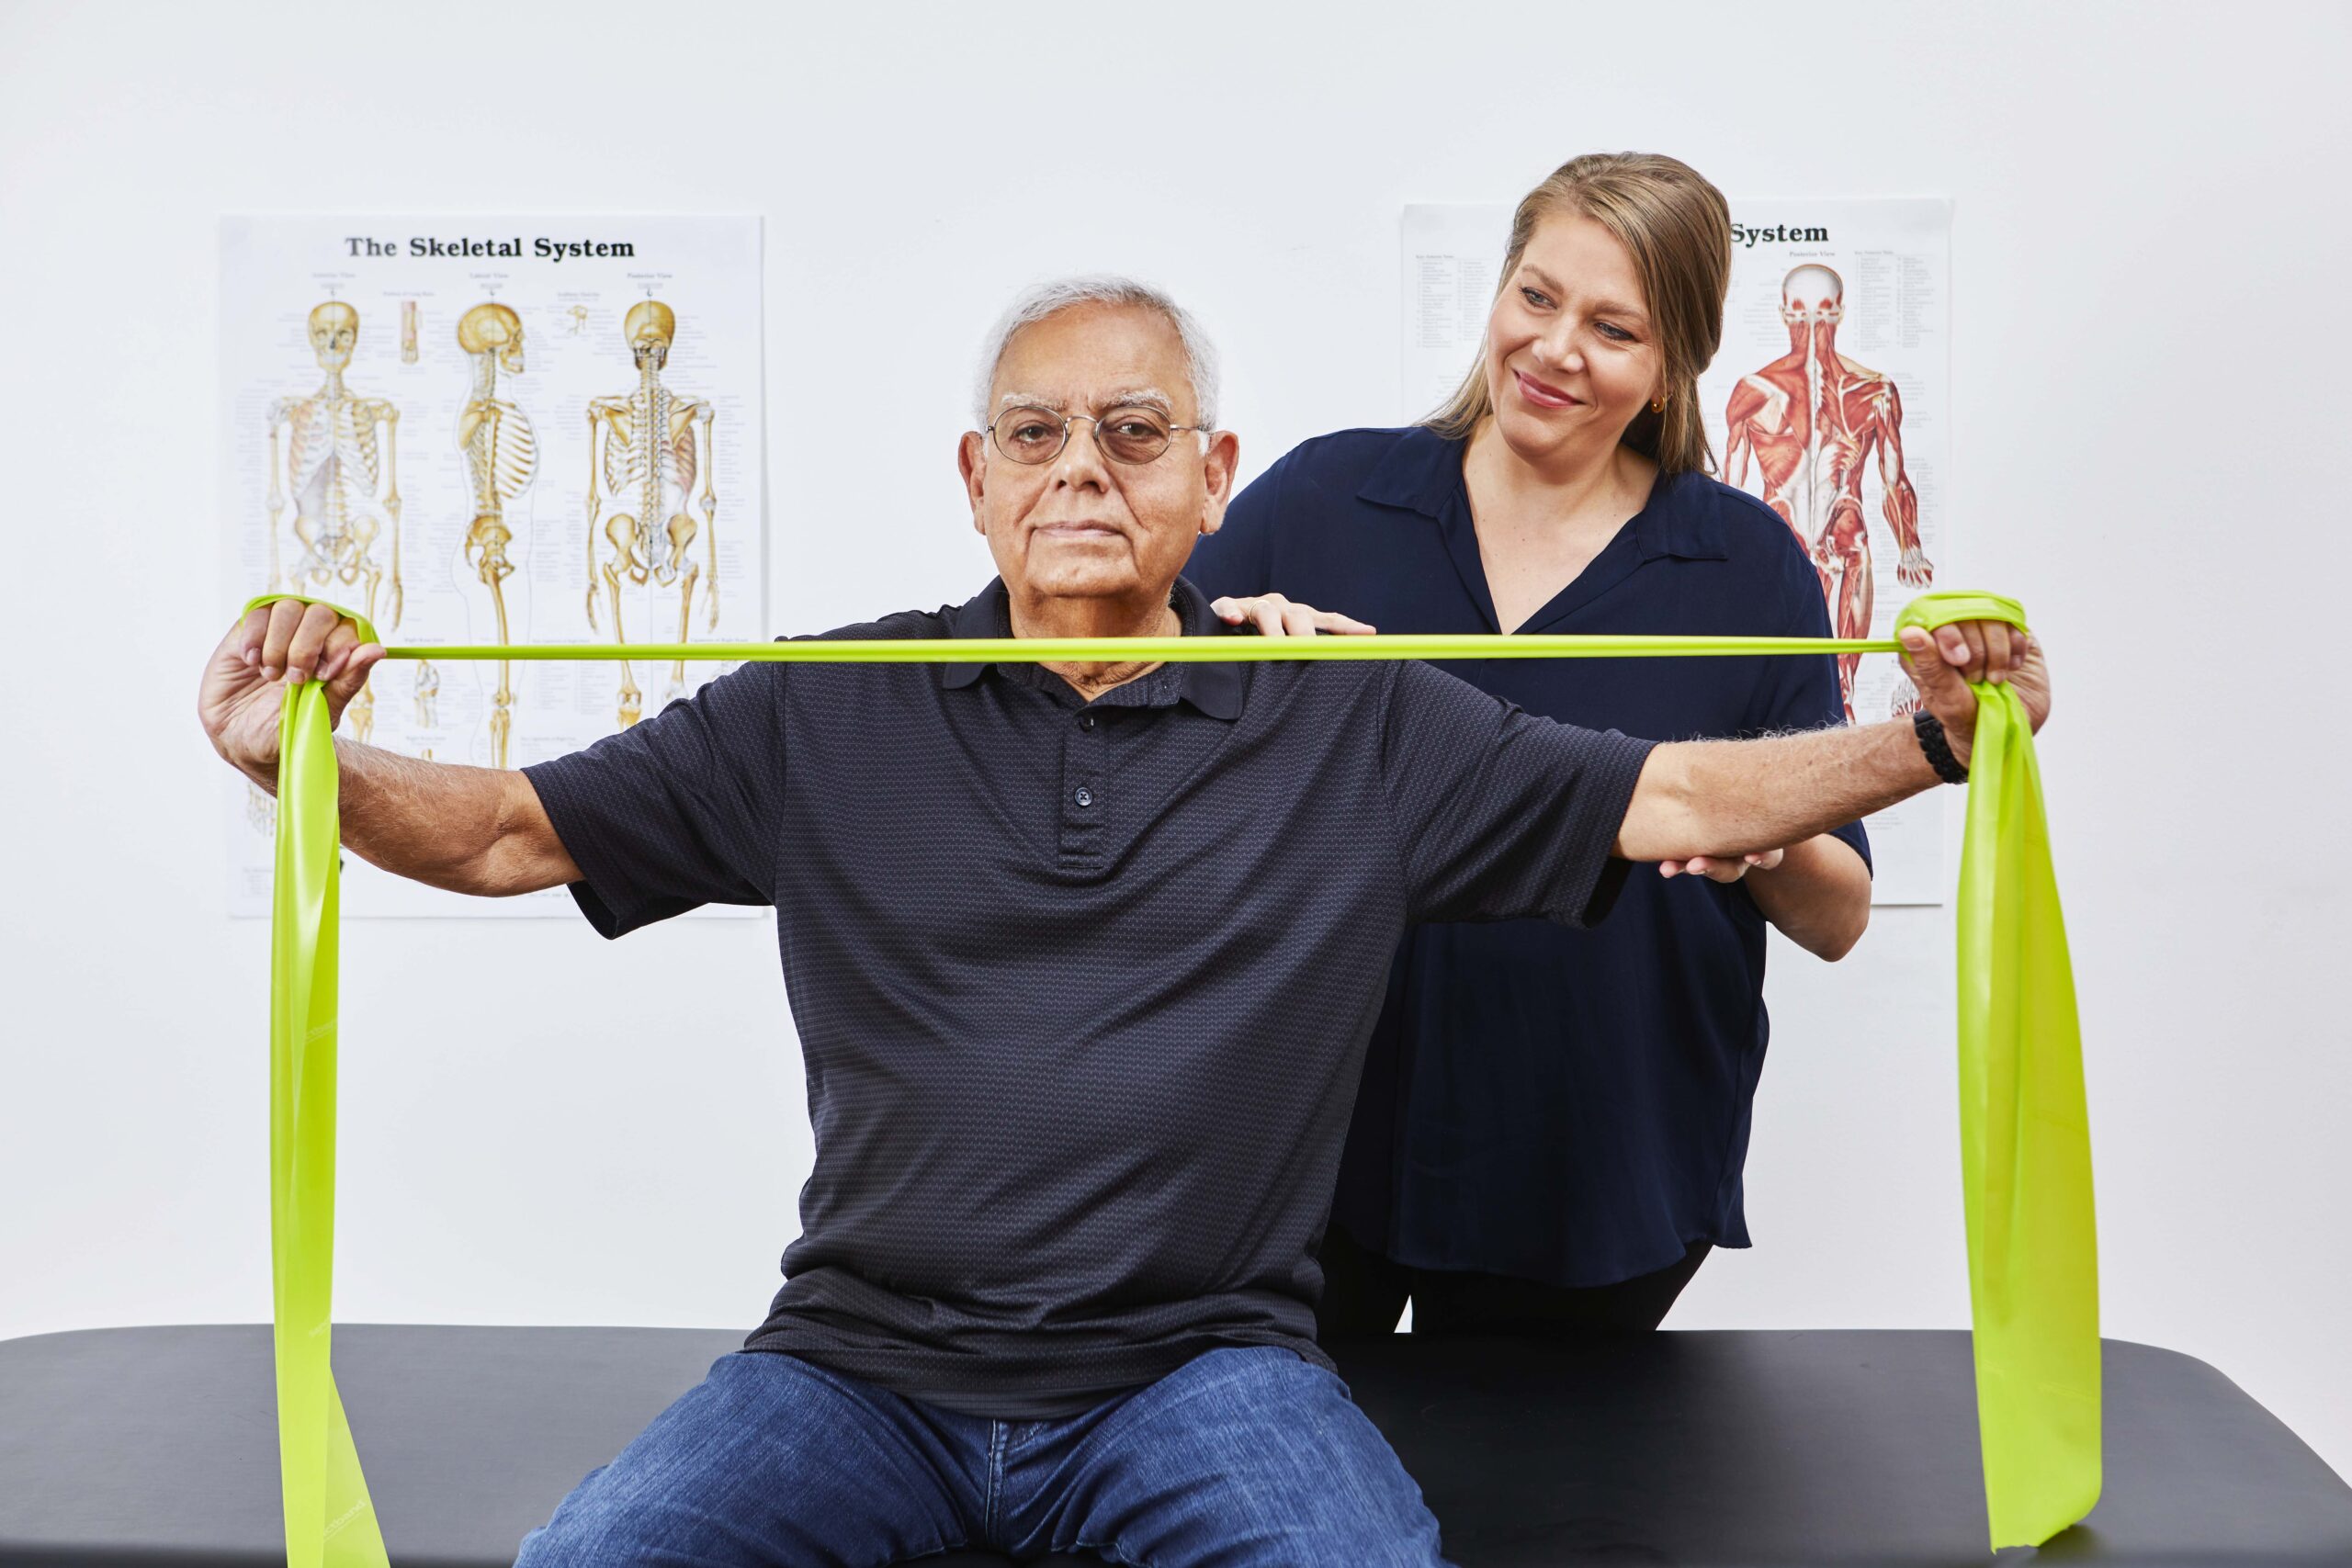 chiropractor with a patient